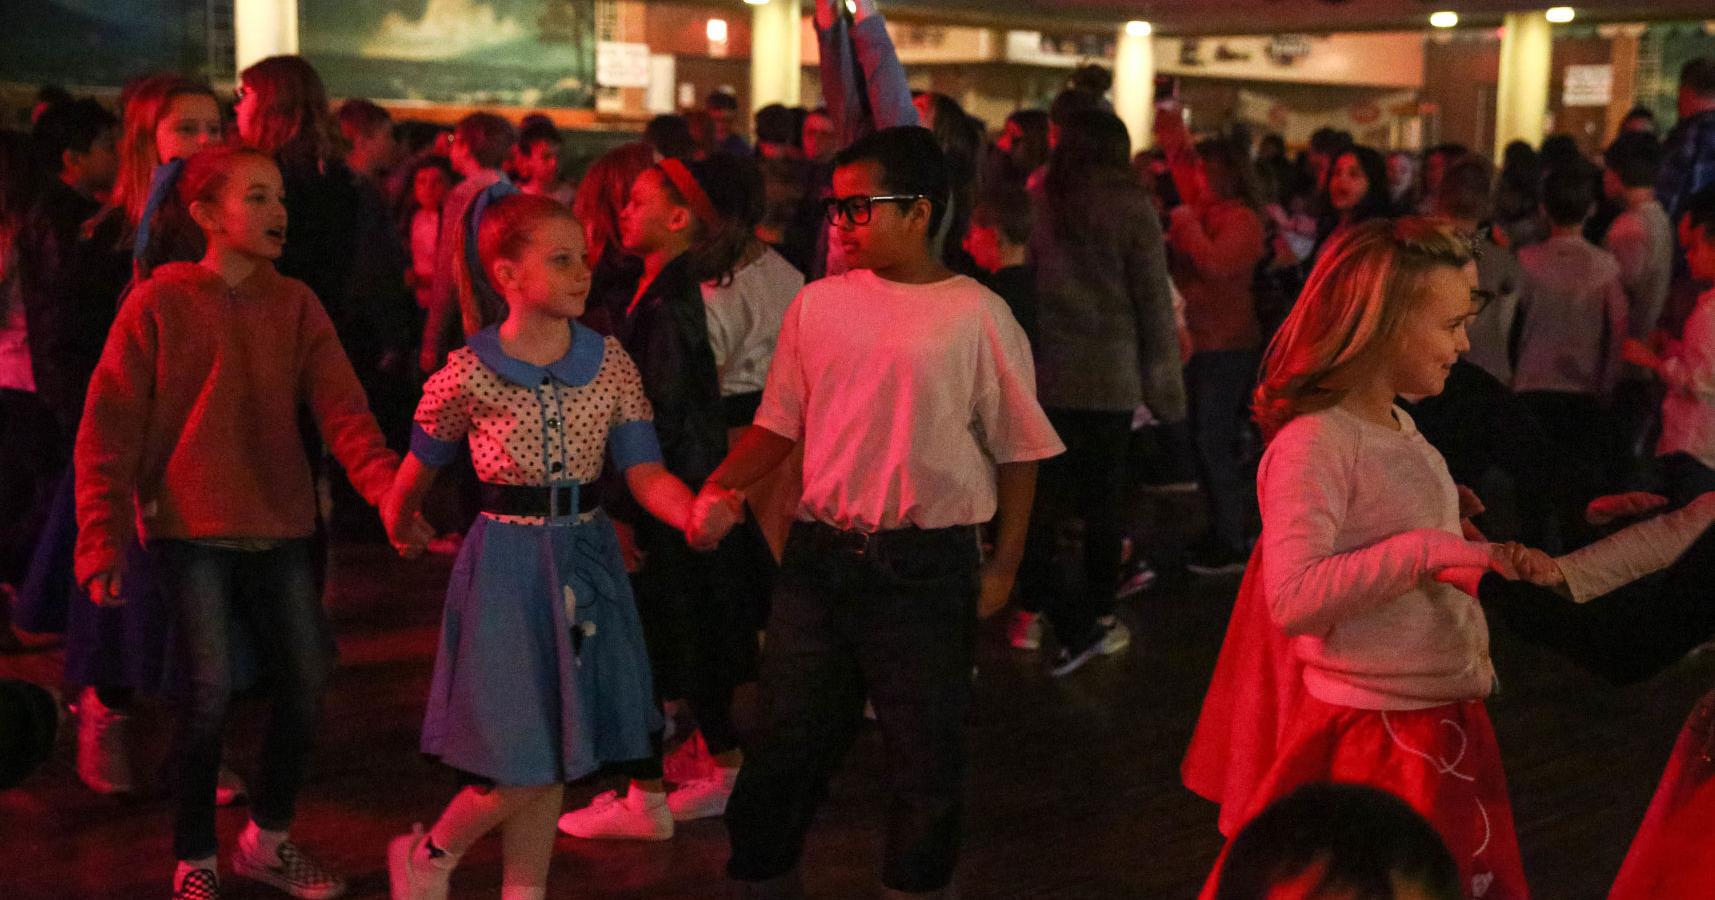 2023 Winter Dance Party weekend features something for everyone